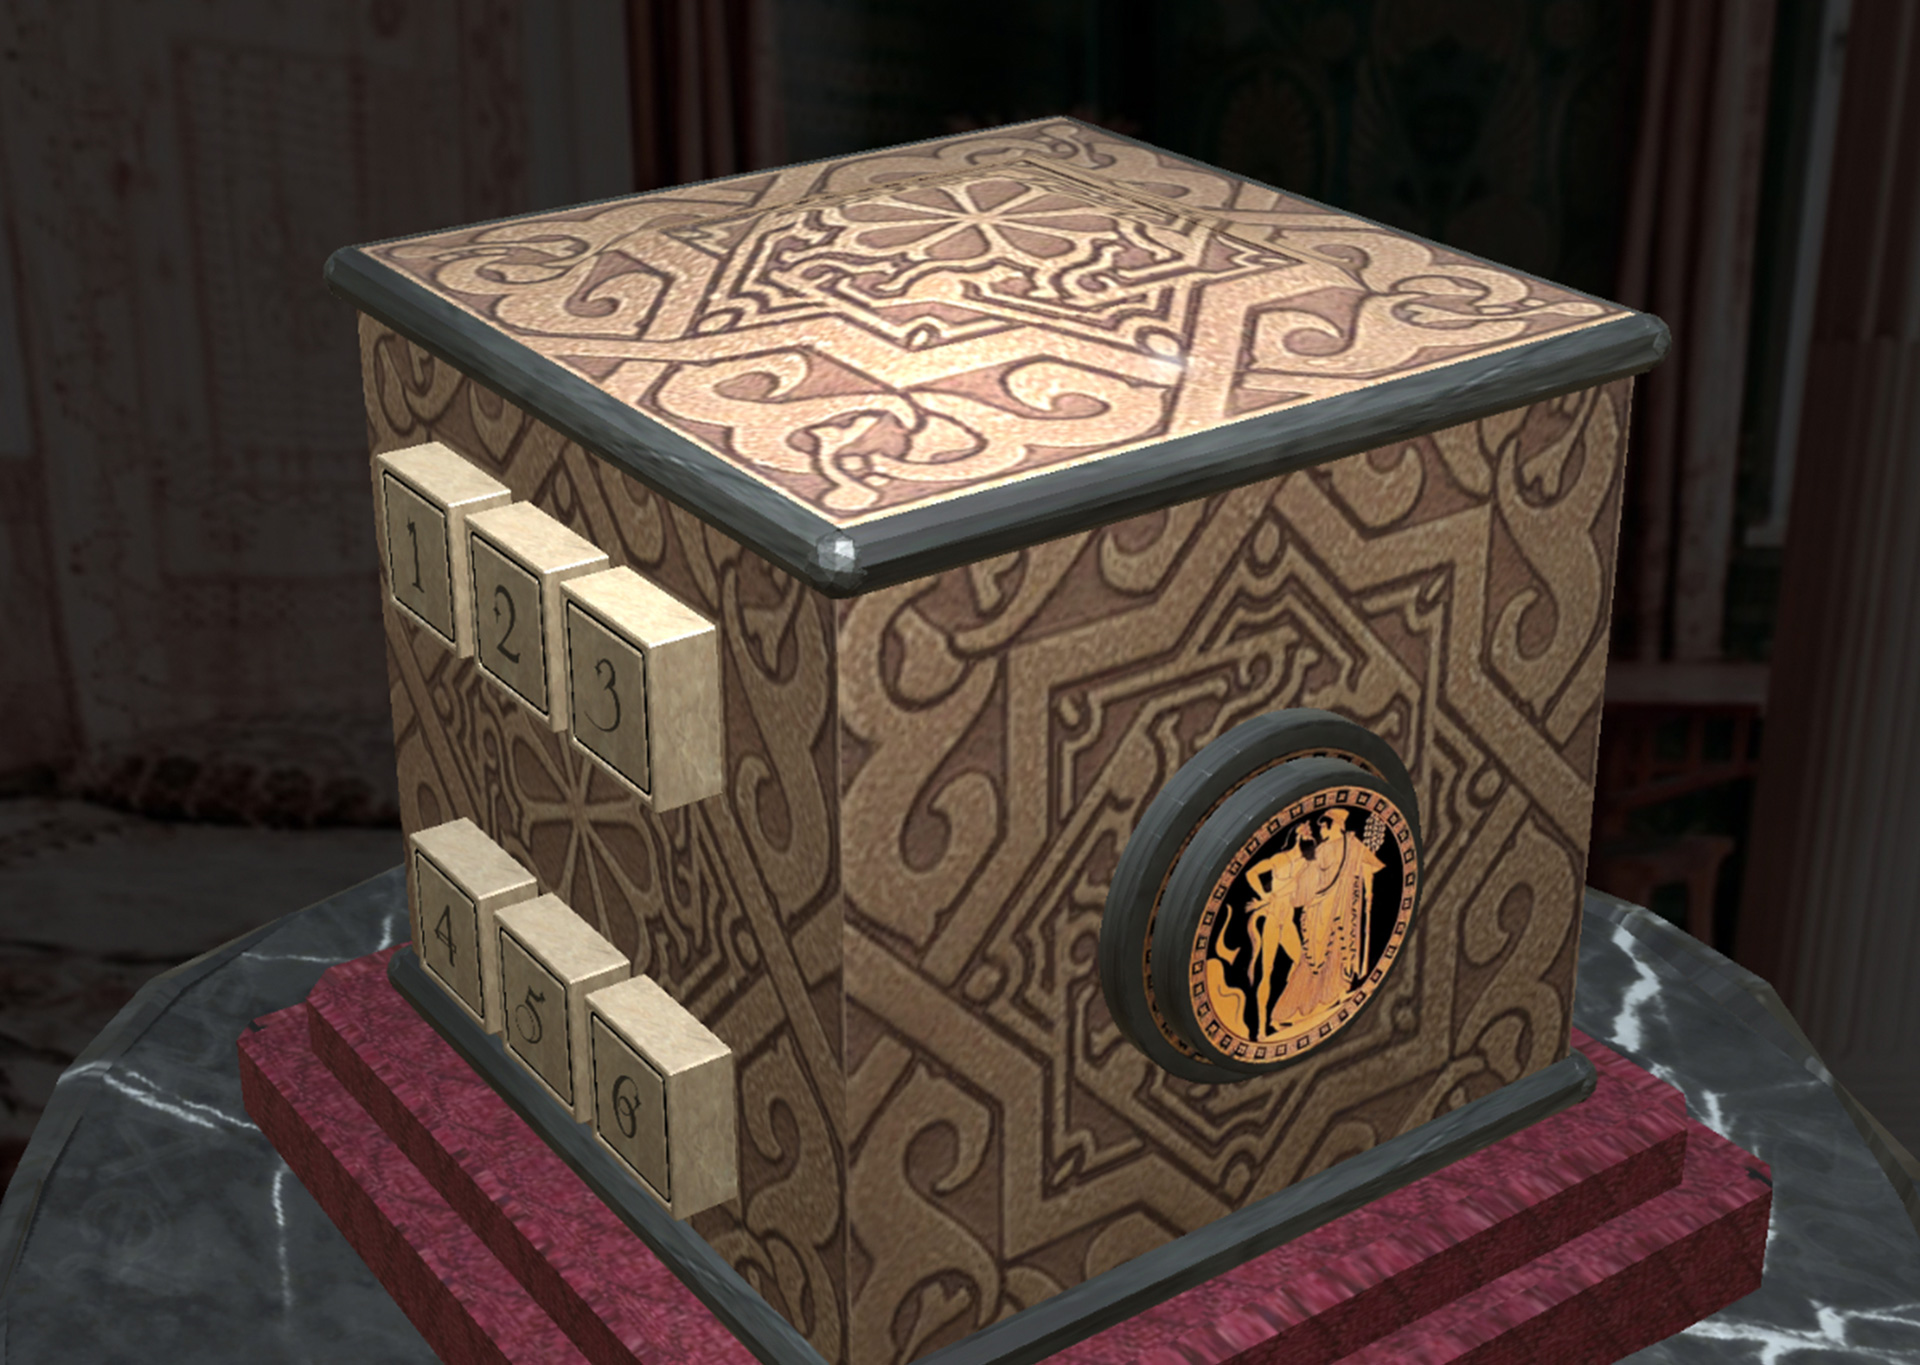 Get Mystery Box - Evolution and take the challenge